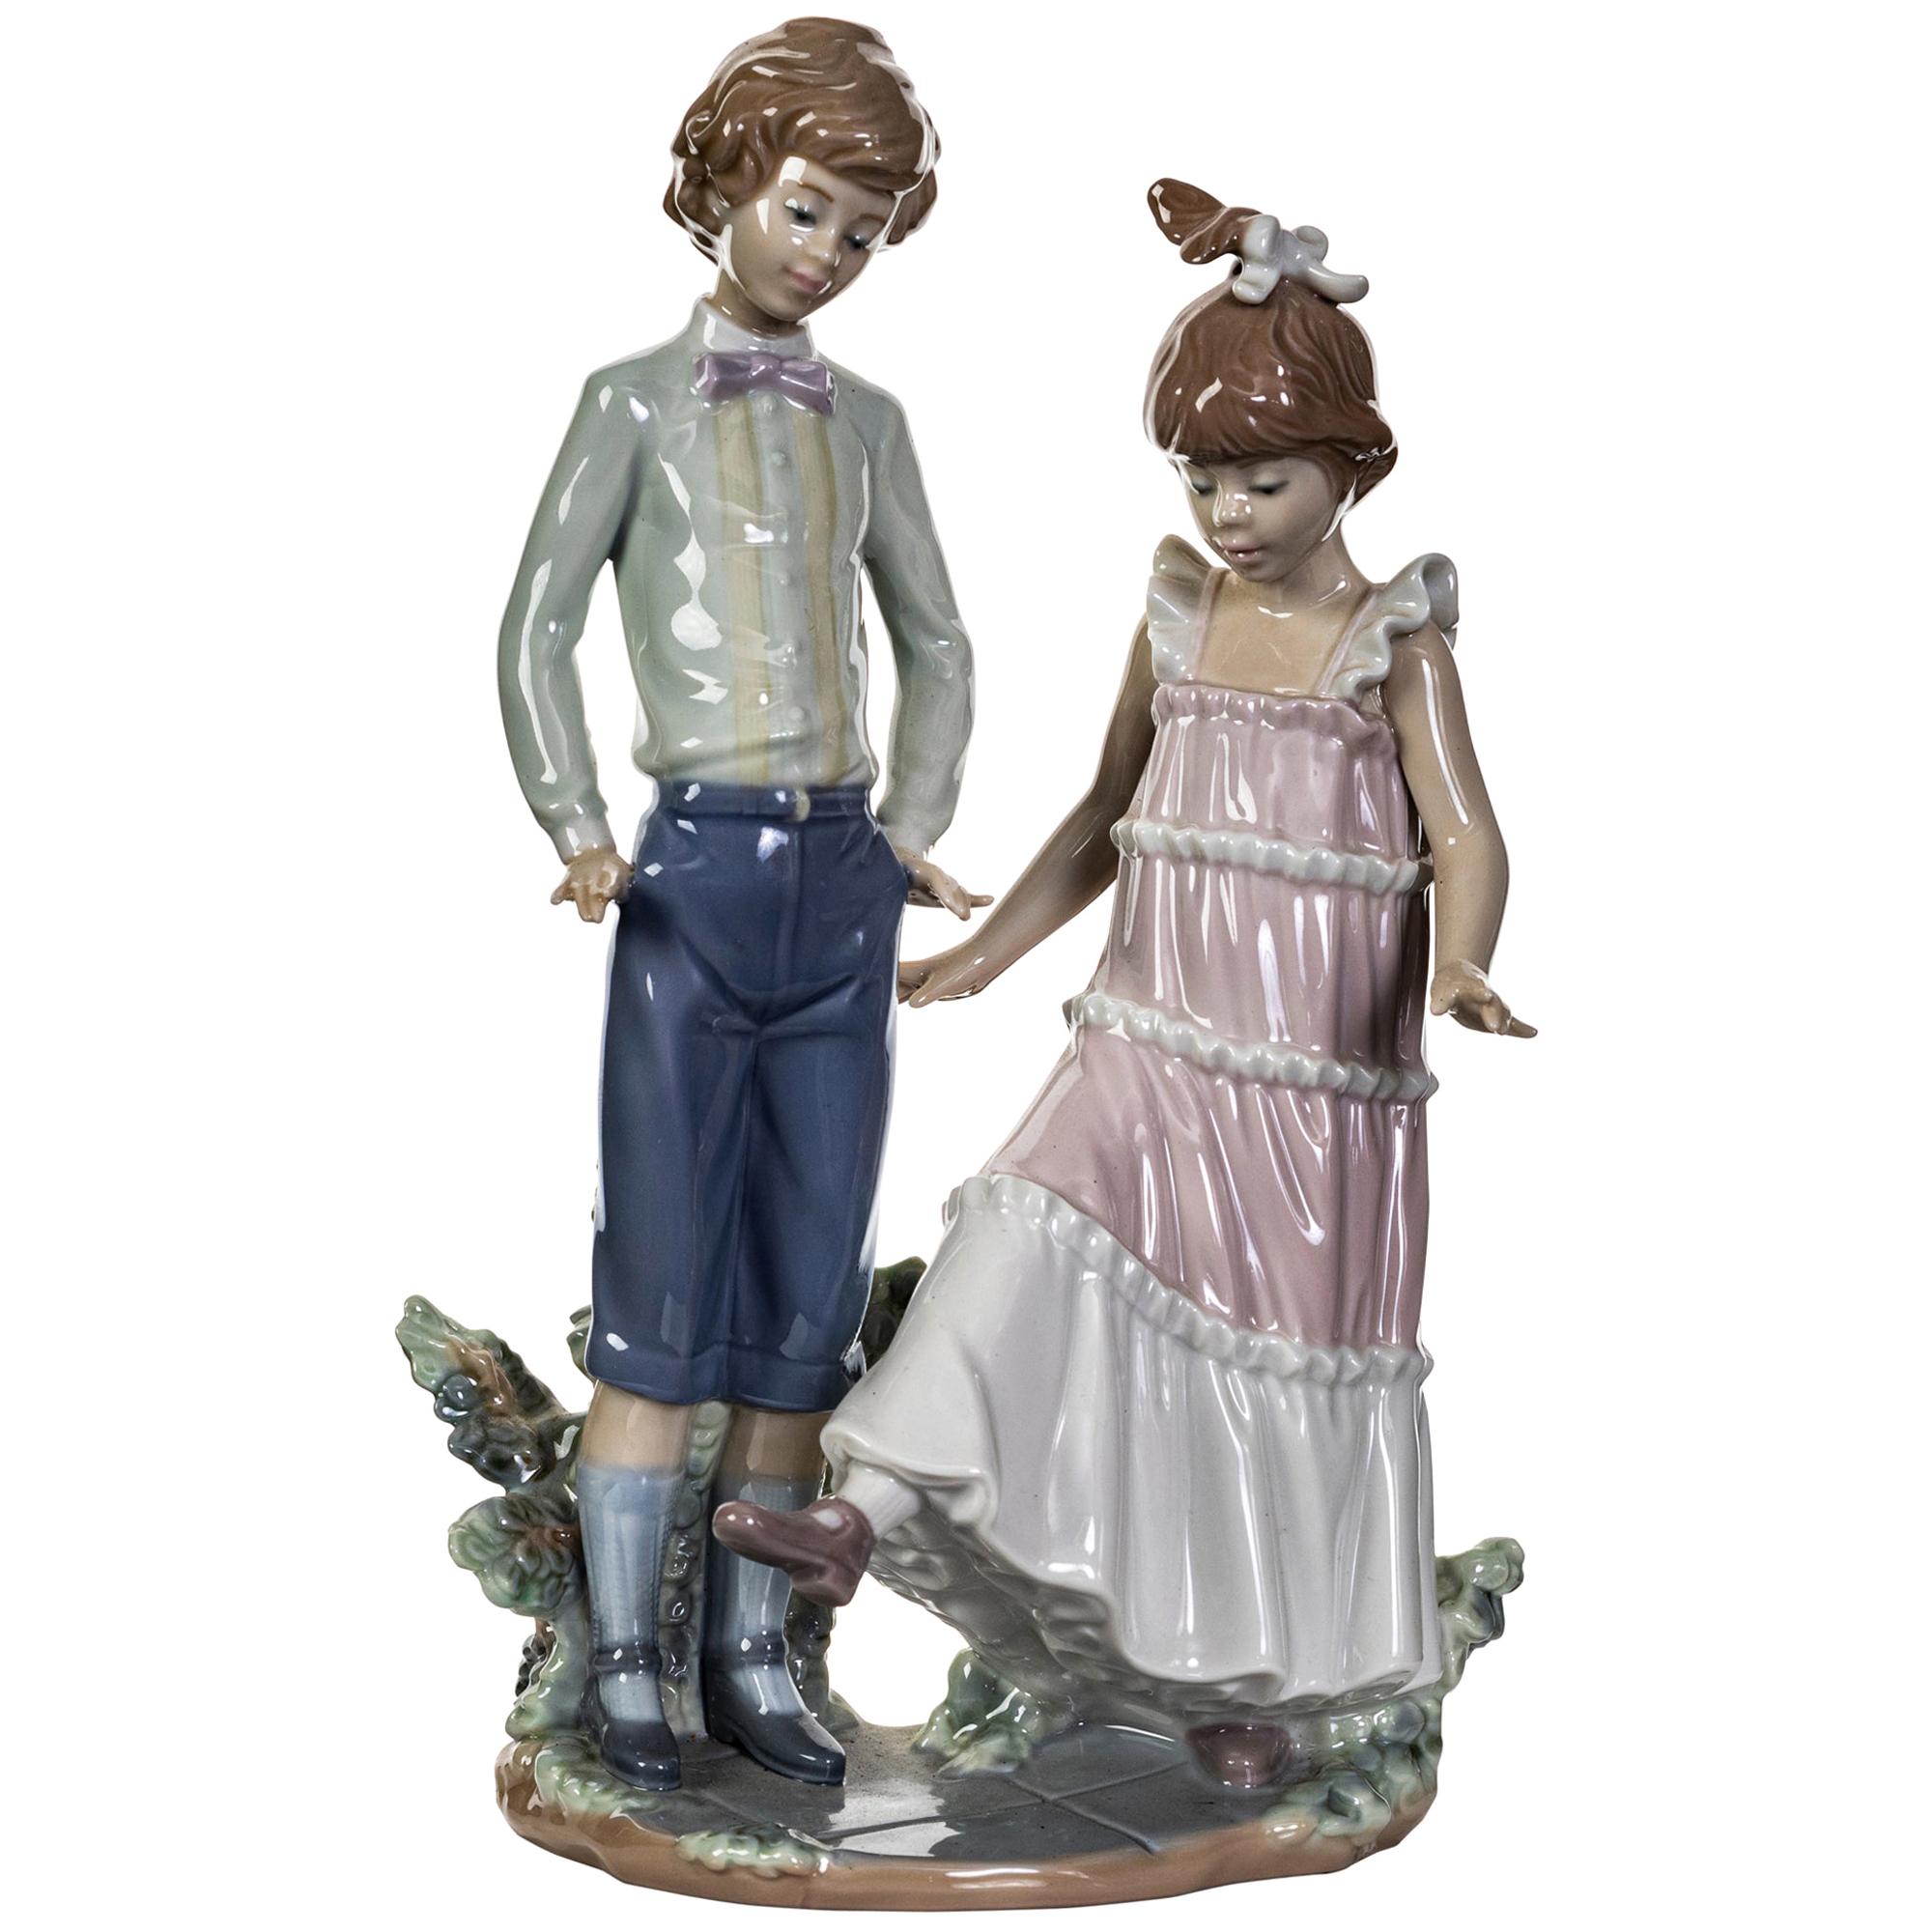 Lladró, Established 1953 "First Dance" Figures of a Boy and Girl